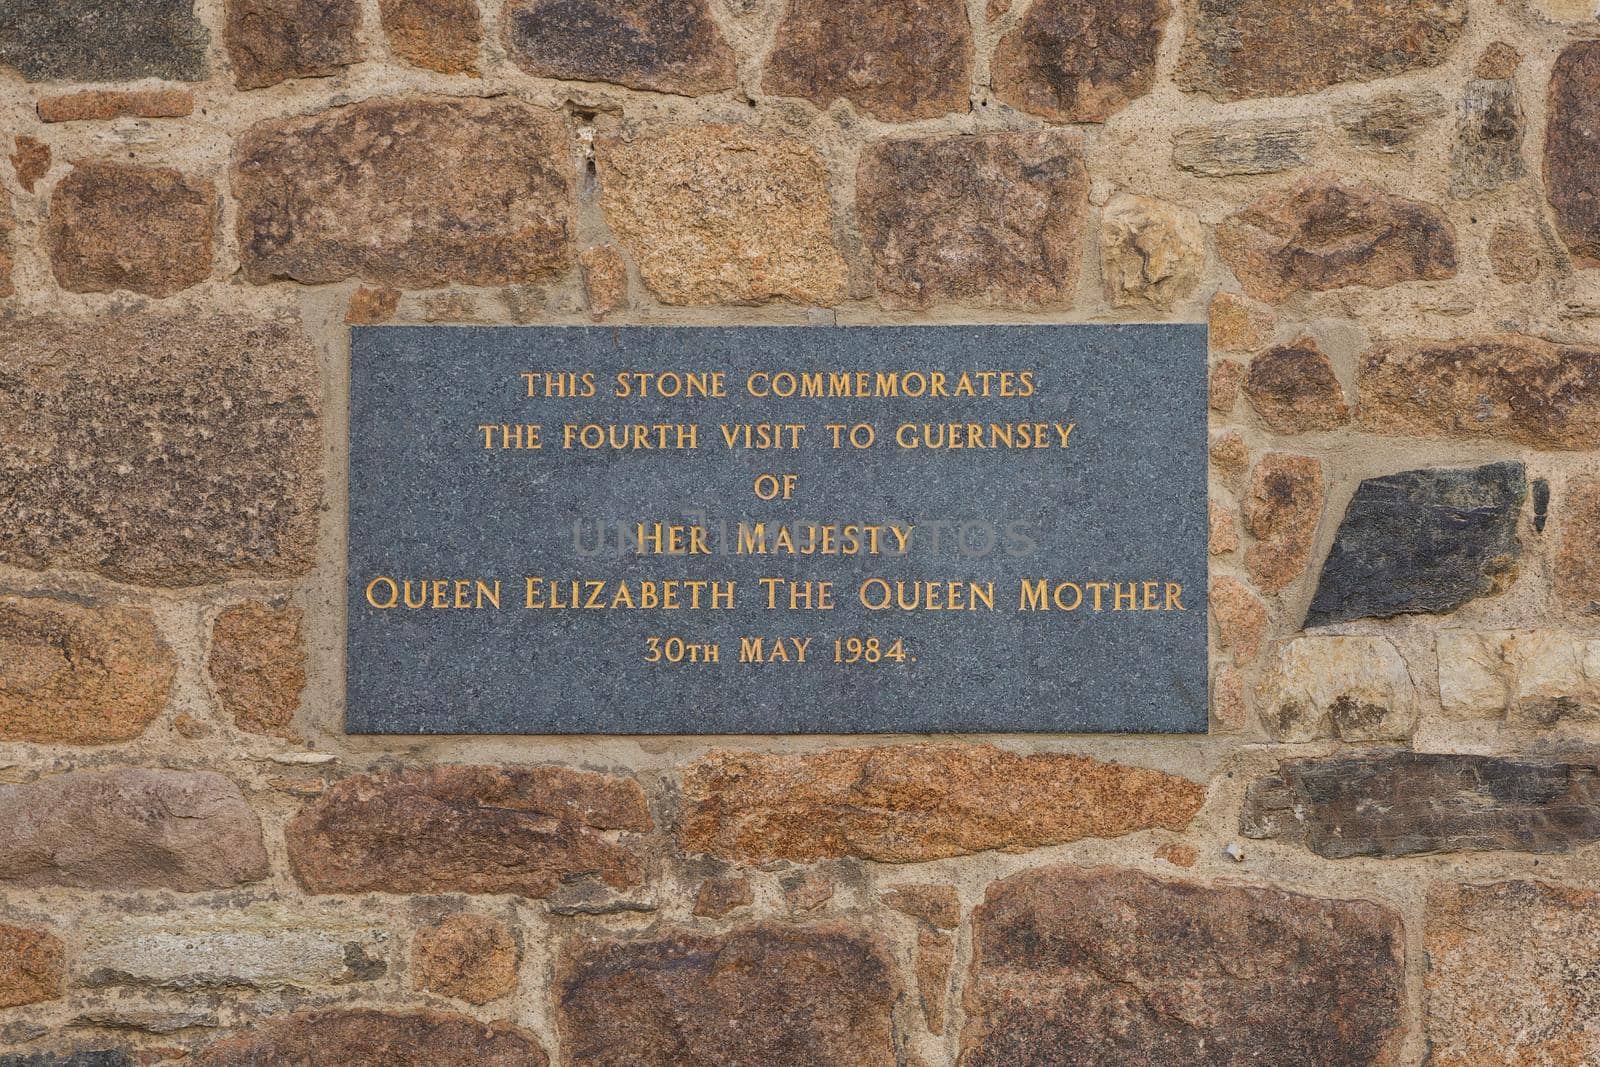 Dedication to Queen Elizabeth the Queen Mother commemorating the date of her fourth visit of Guernsey by wondry